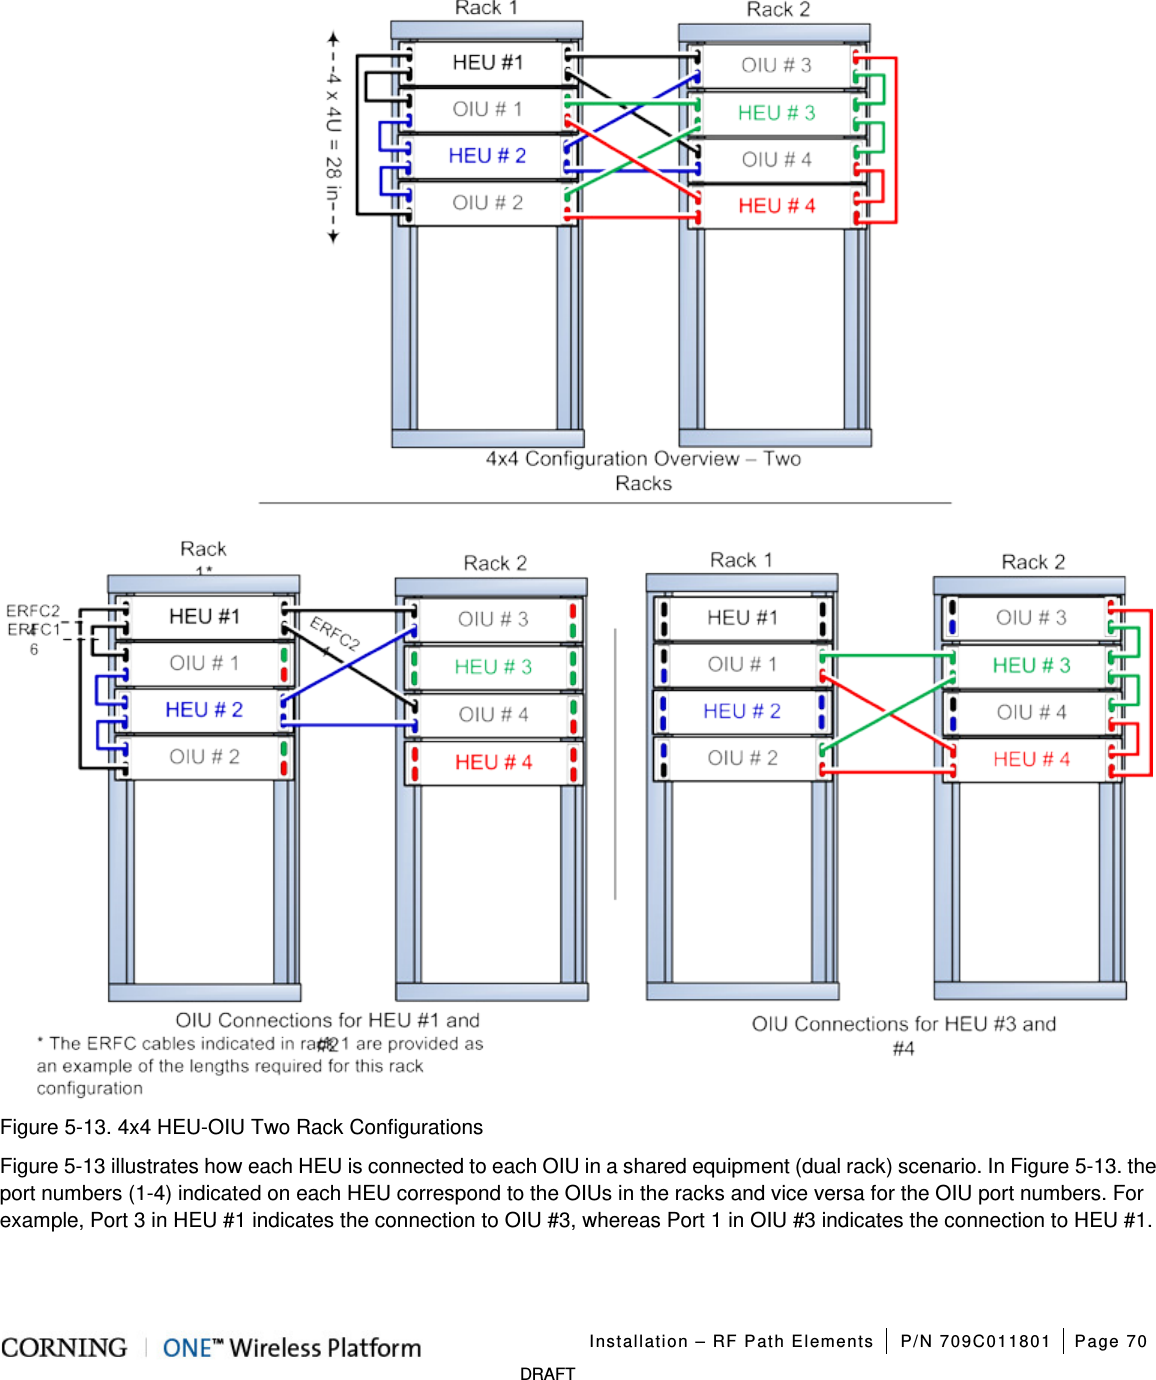   Installation – RF Path Elements P/N 709C011801 Page 70   DRAFT   Figure  5-13. 4x4 HEU-OIU Two Rack Configurations Figure  5-13 illustrates how each HEU is connected to each OIU in a shared equipment (dual rack) scenario. In Figure  5-13. the port numbers (1-4) indicated on each HEU correspond to the OIUs in the racks and vice versa for the OIU port numbers. For example, Port 3 in HEU #1 indicates the connection to OIU #3, whereas Port 1 in OIU #3 indicates the connection to HEU #1.  